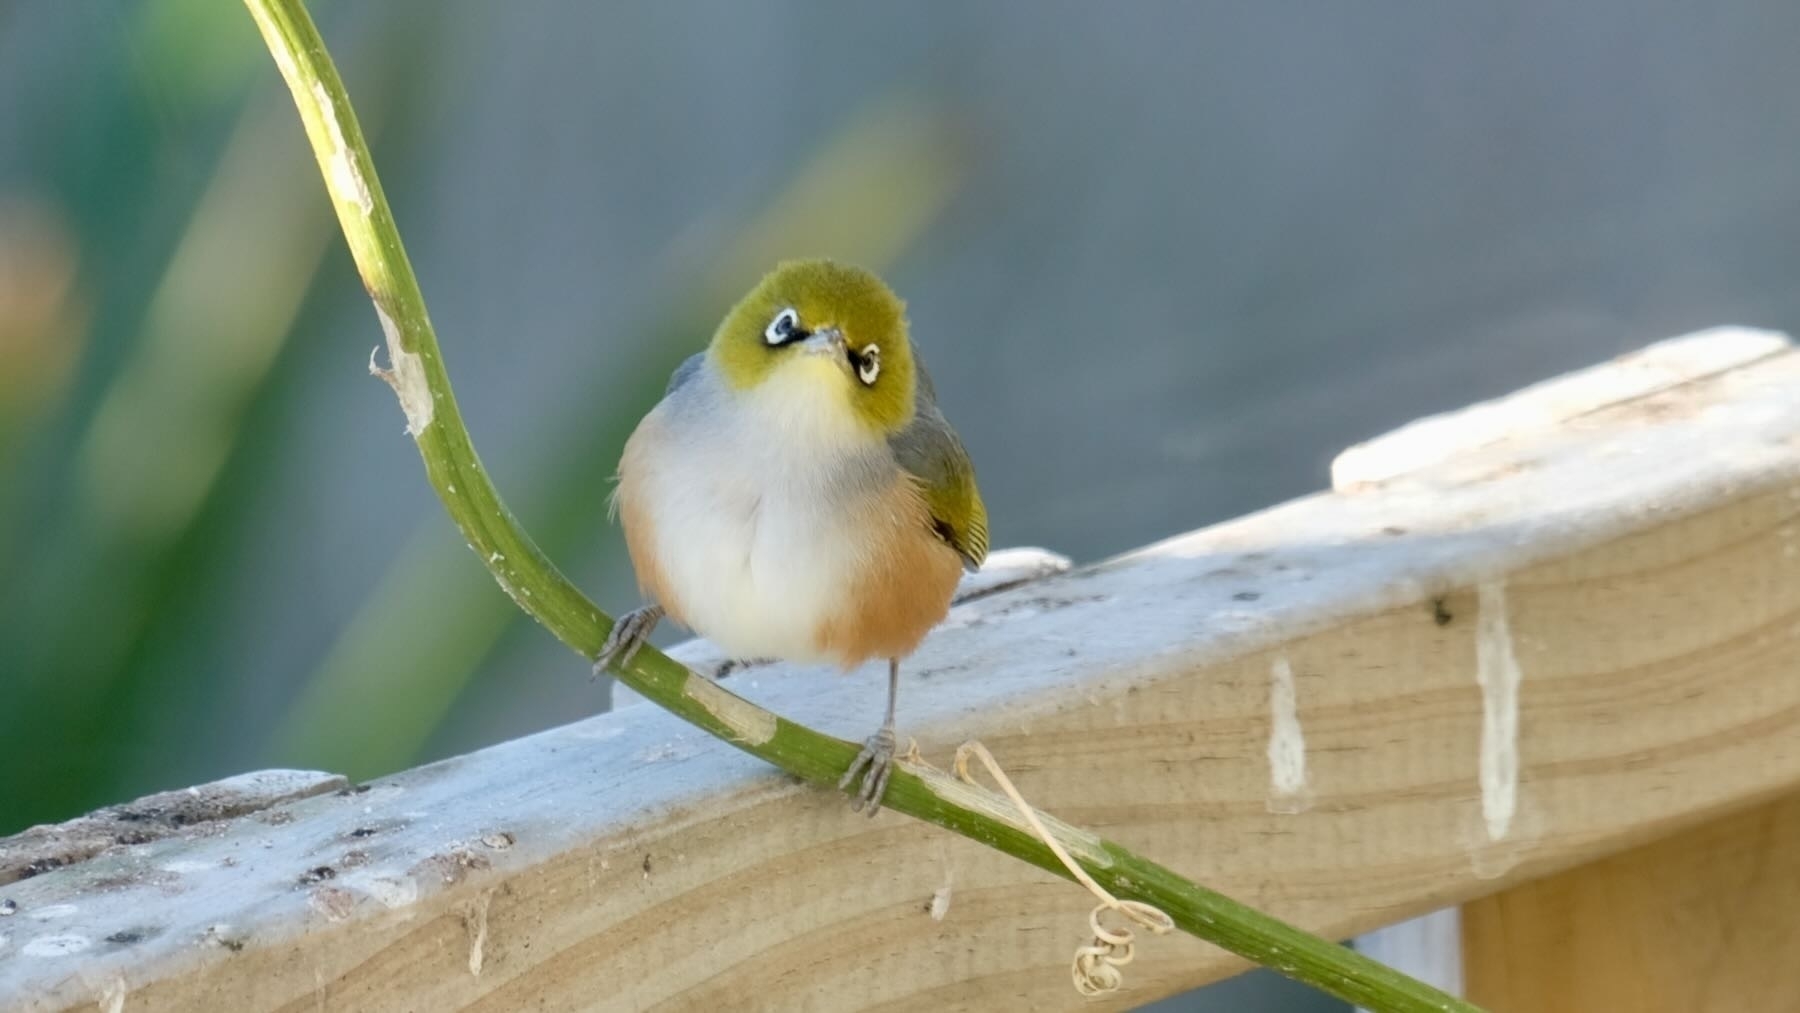 Small bird looks straight at the camera with forward facing eyes making it look goofy. 